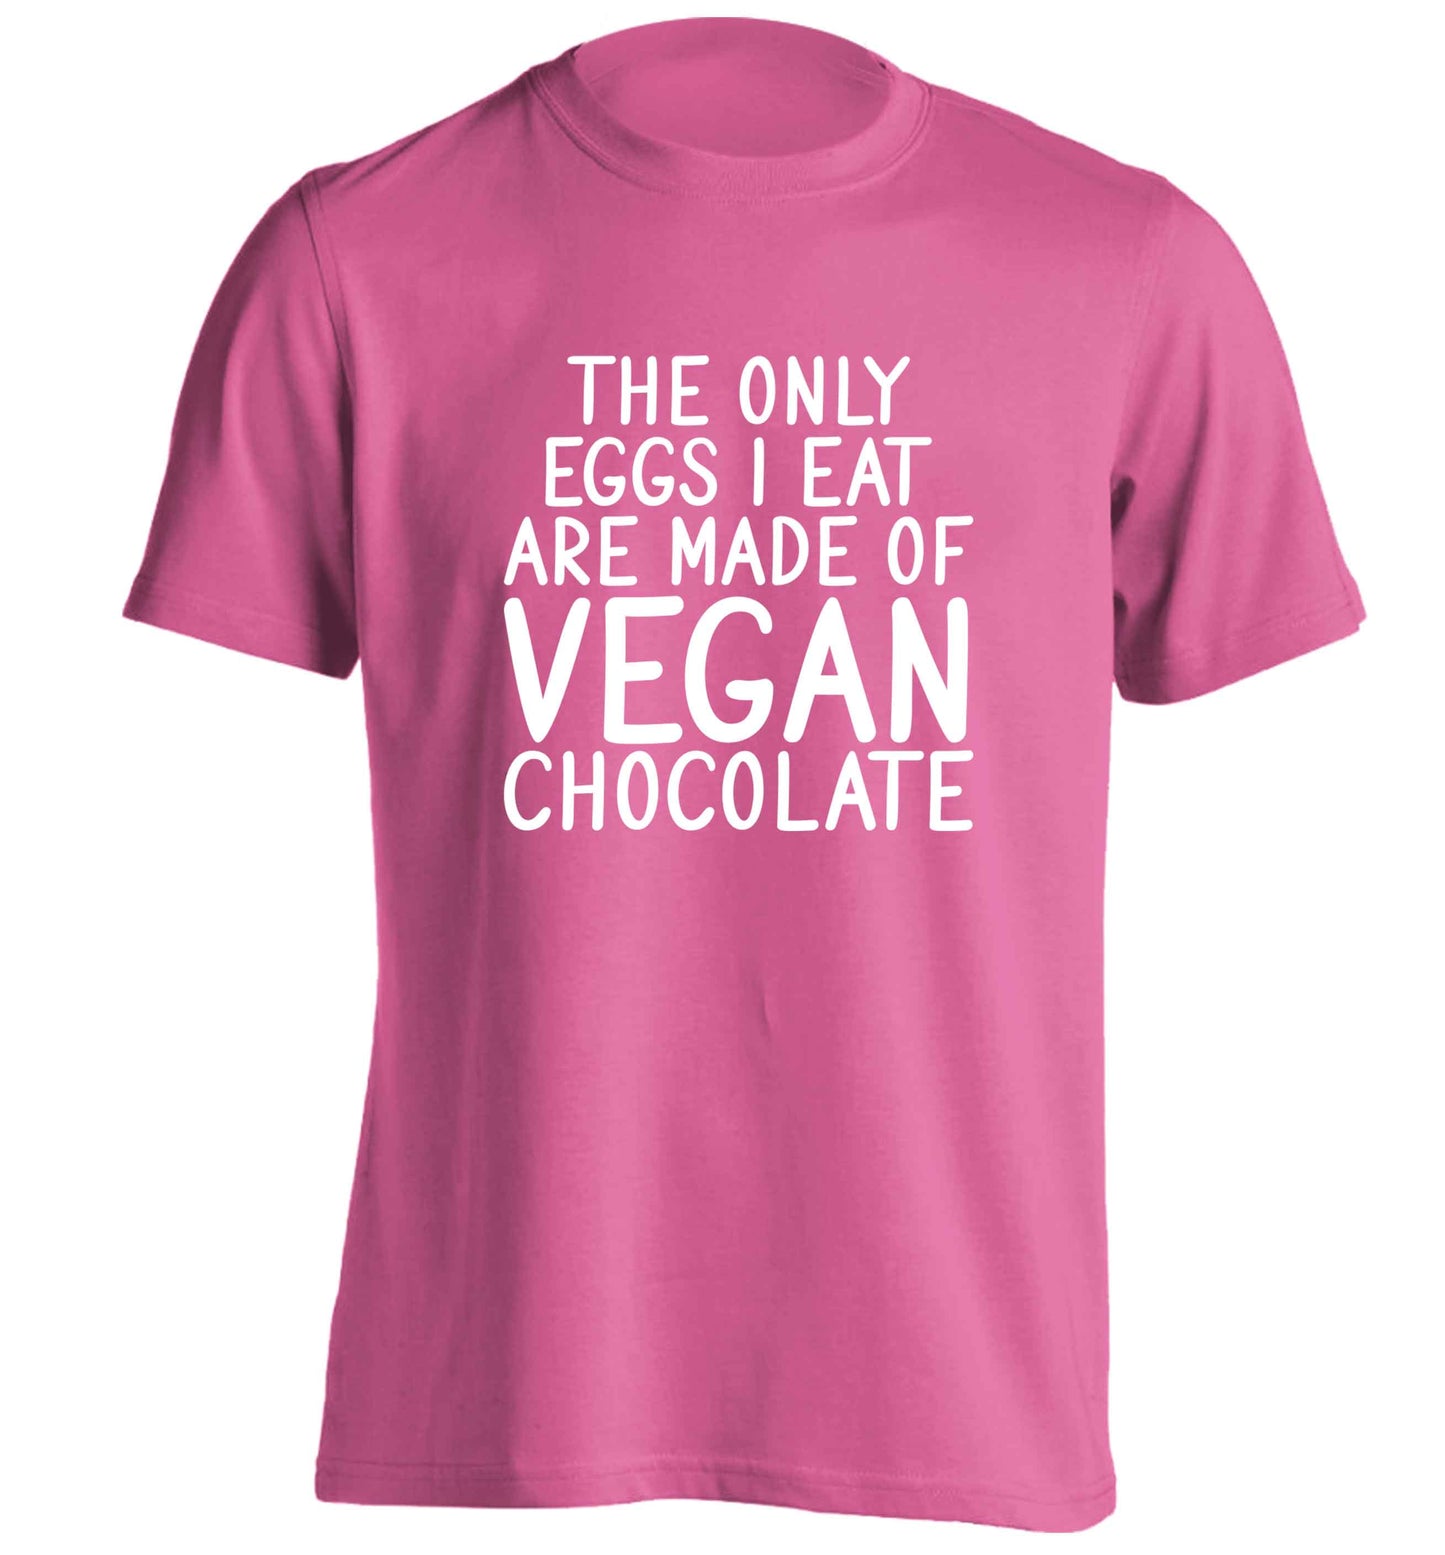 The only eggs I eat are made of vegan chocolate adults unisex pink Tshirt 2XL